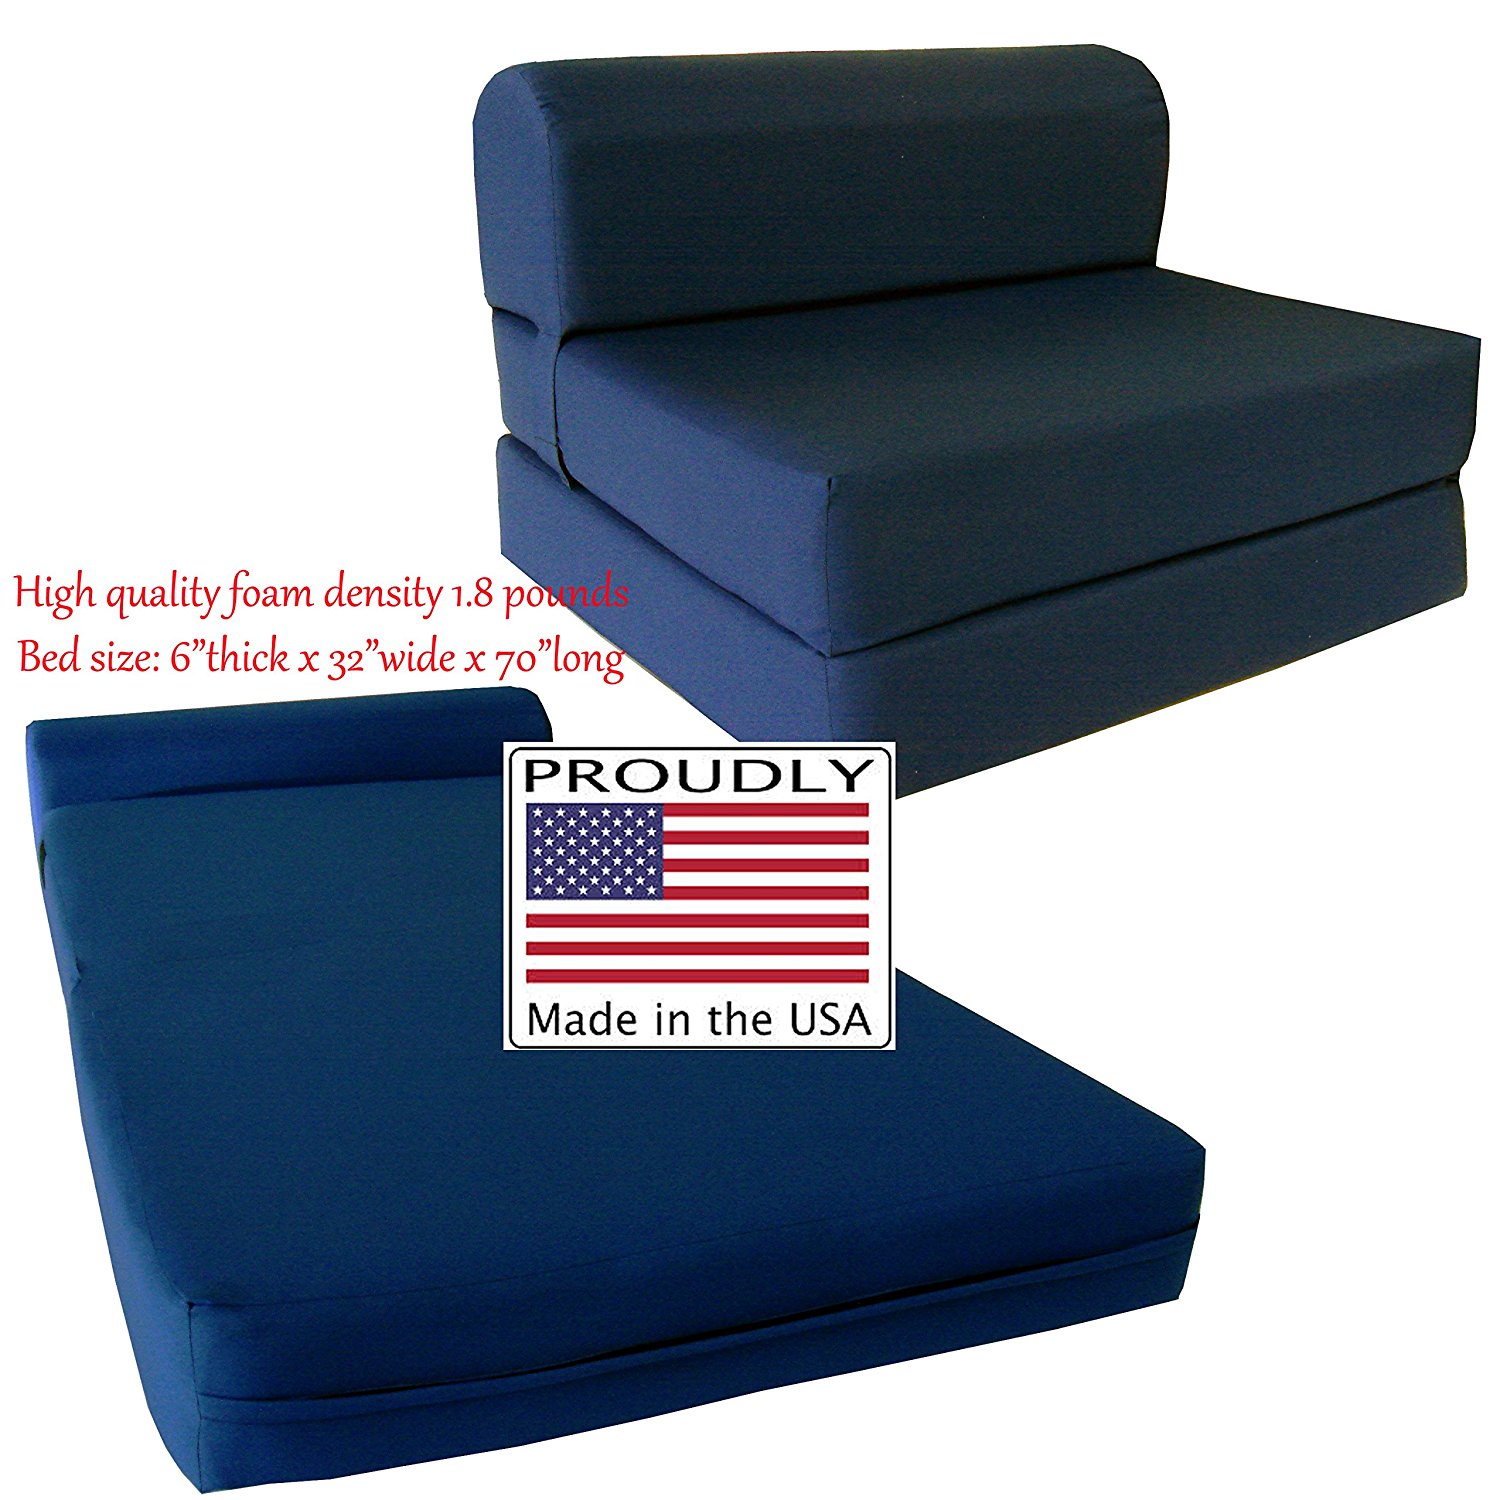 Navy Sleeper Chair Folding Foam Bed Sized 6" Thick X 32" Wide X 70" Long, Studio Guest Foldable Chair Beds, Foam Sofa, Couch, High Density Foam 1.8 Pounds.